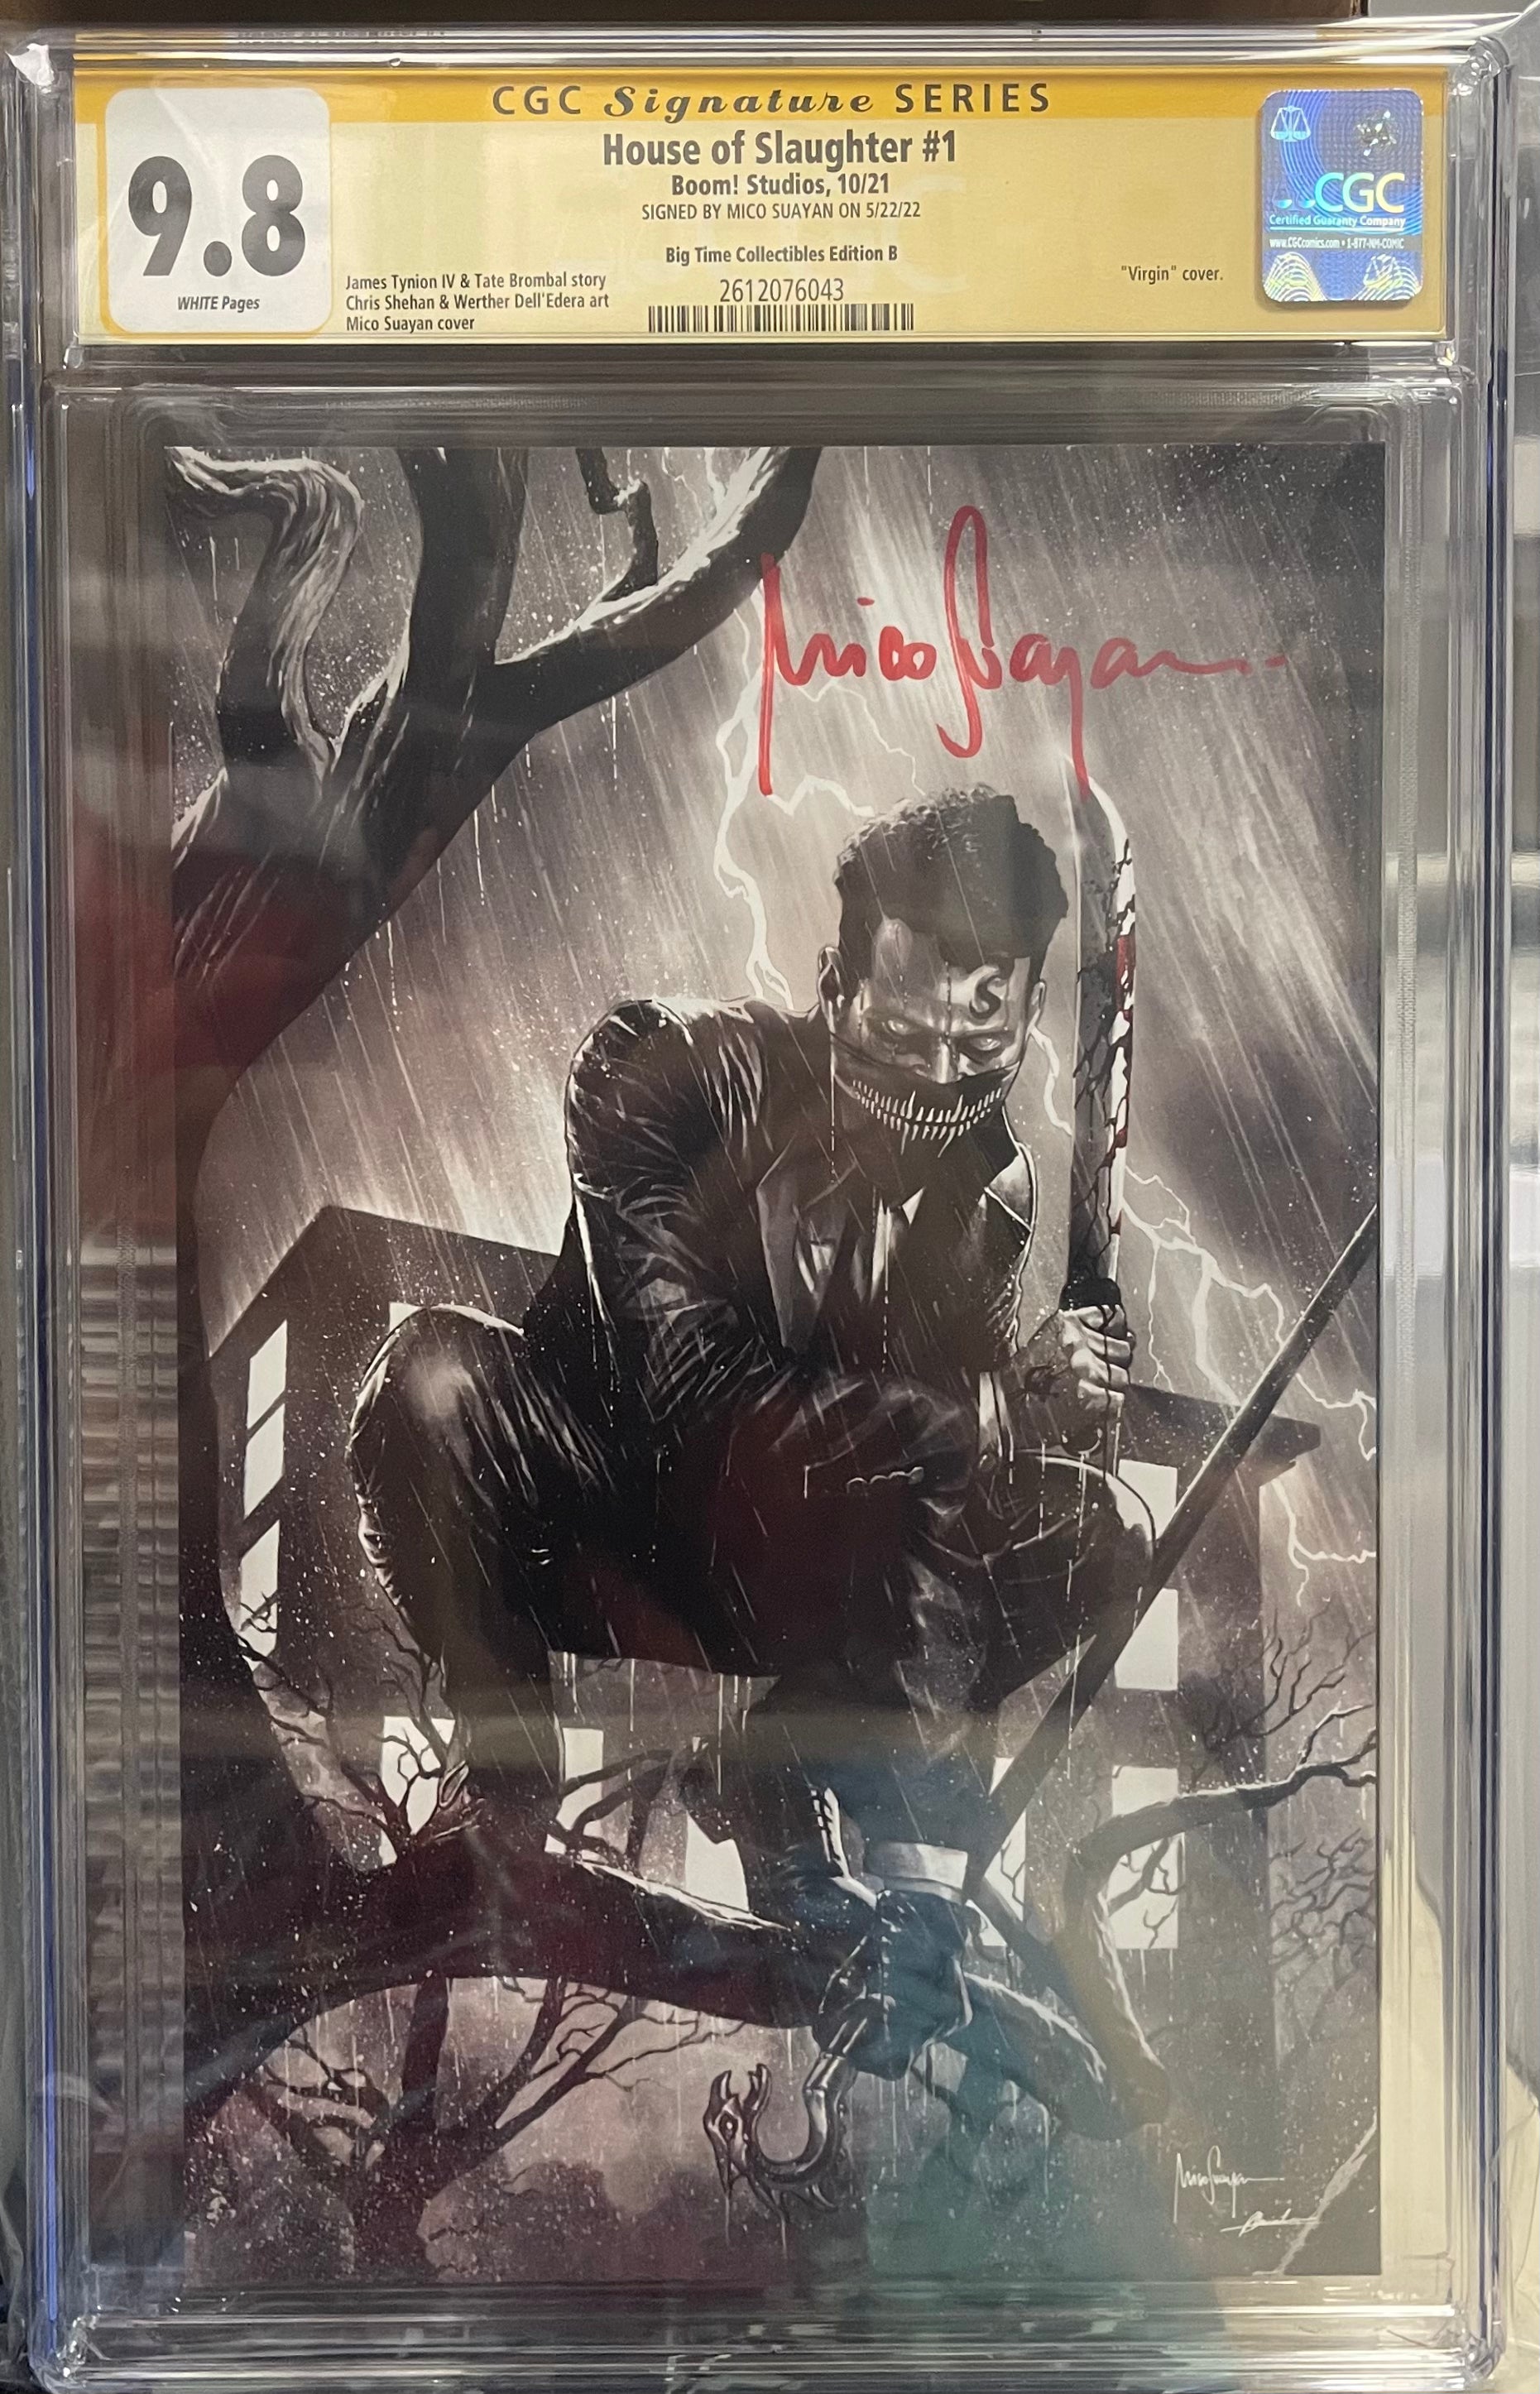 HOUSE OF SLAUGHTER #1 EXCLUSIVE SKETCH VARIANT SIGNED BY MICO SUAYAN CGC 9.8